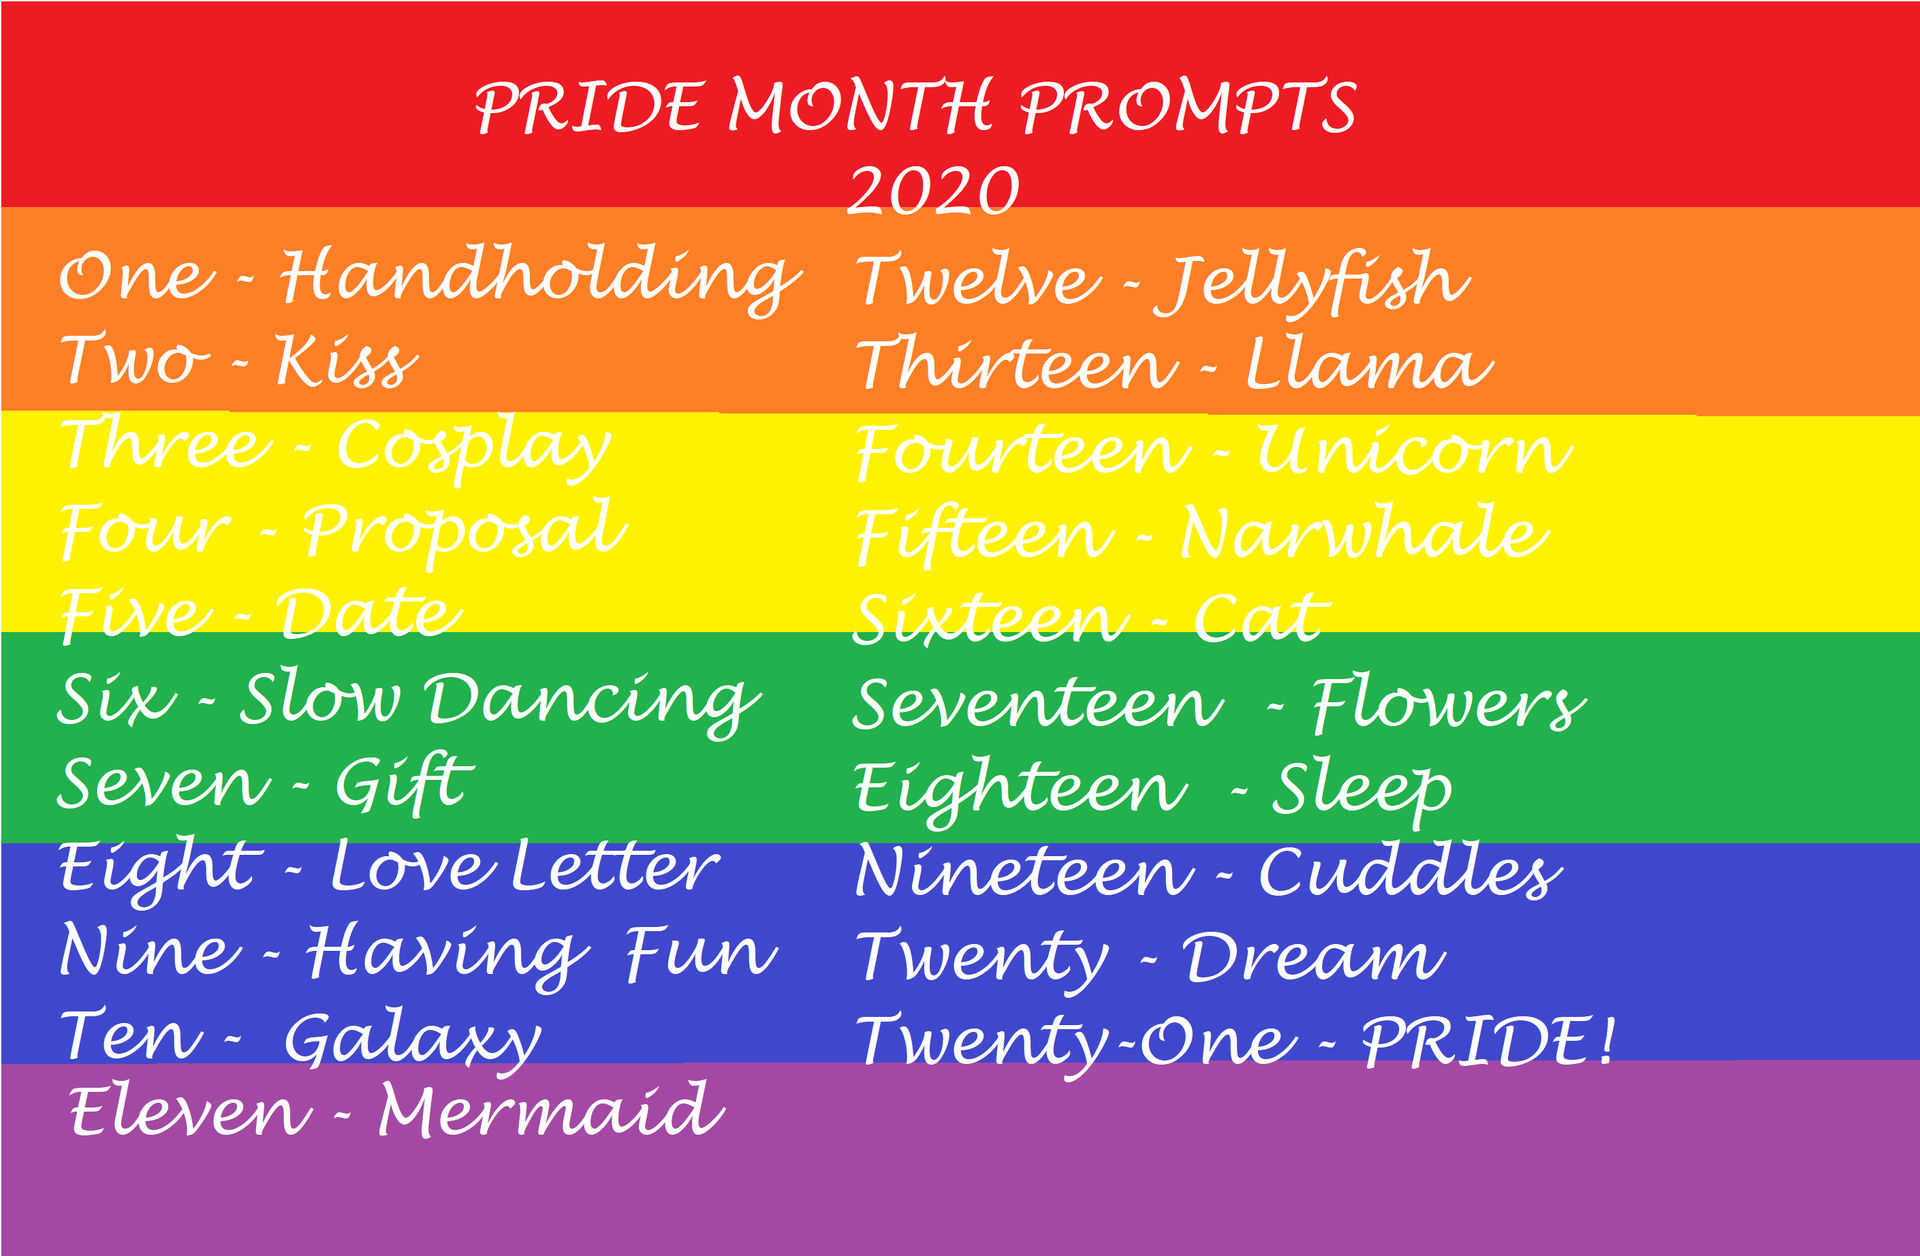 Pride Month 2020 Drawing Prompts by MofuMofuQueen-Potato on DeviantArt